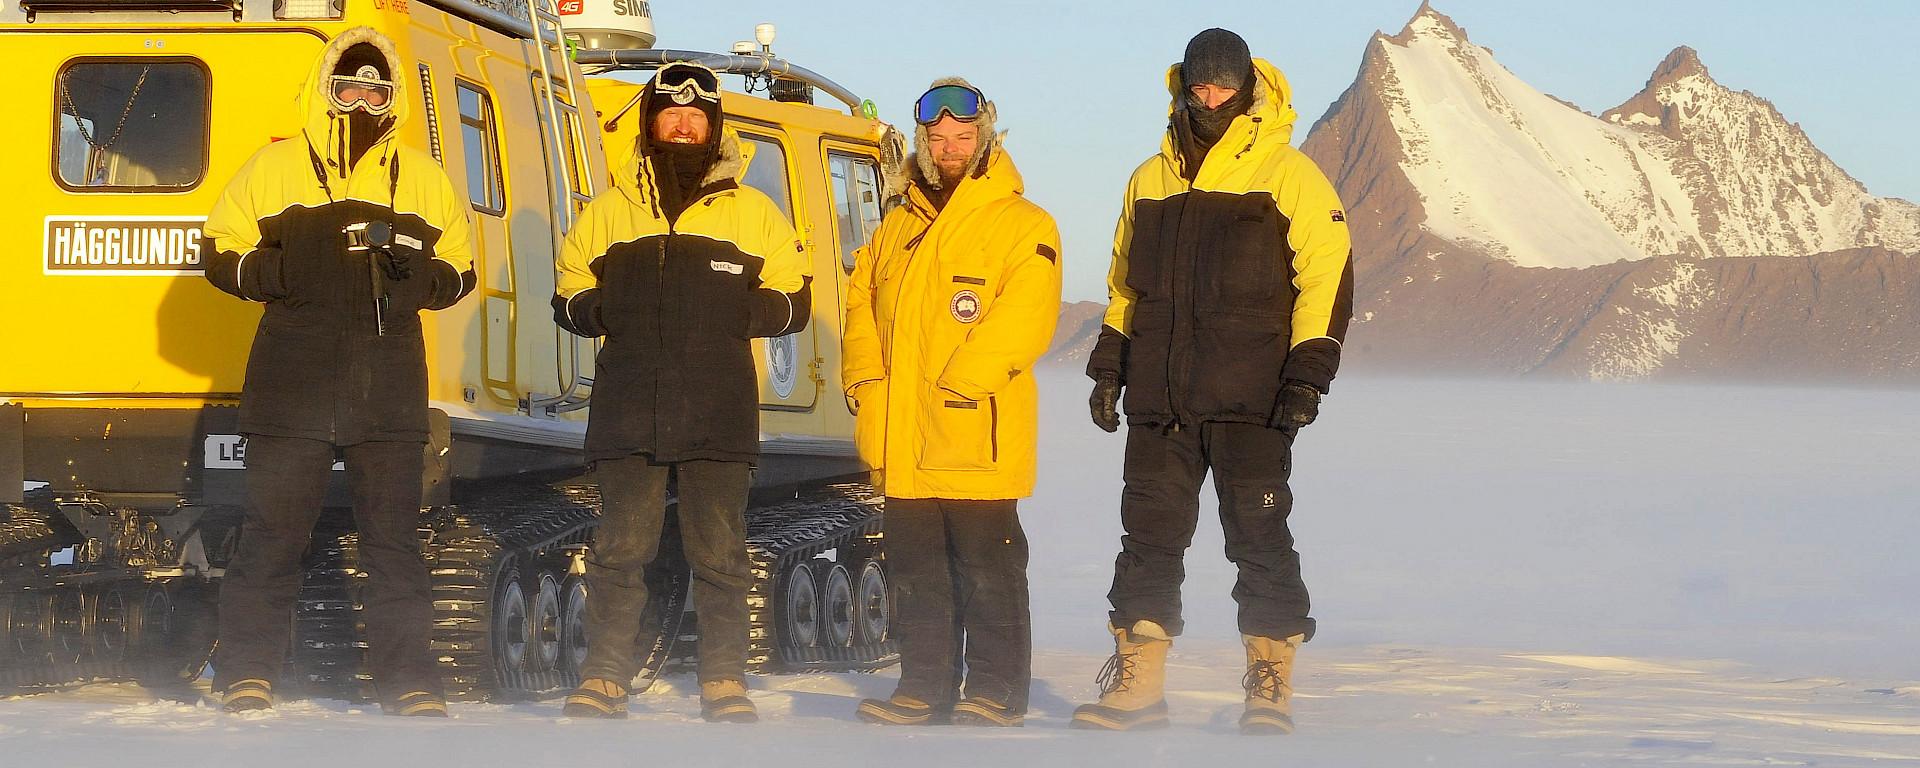 Expeditioners stand in front of a yellow Hägglunds in a snowy landscape.